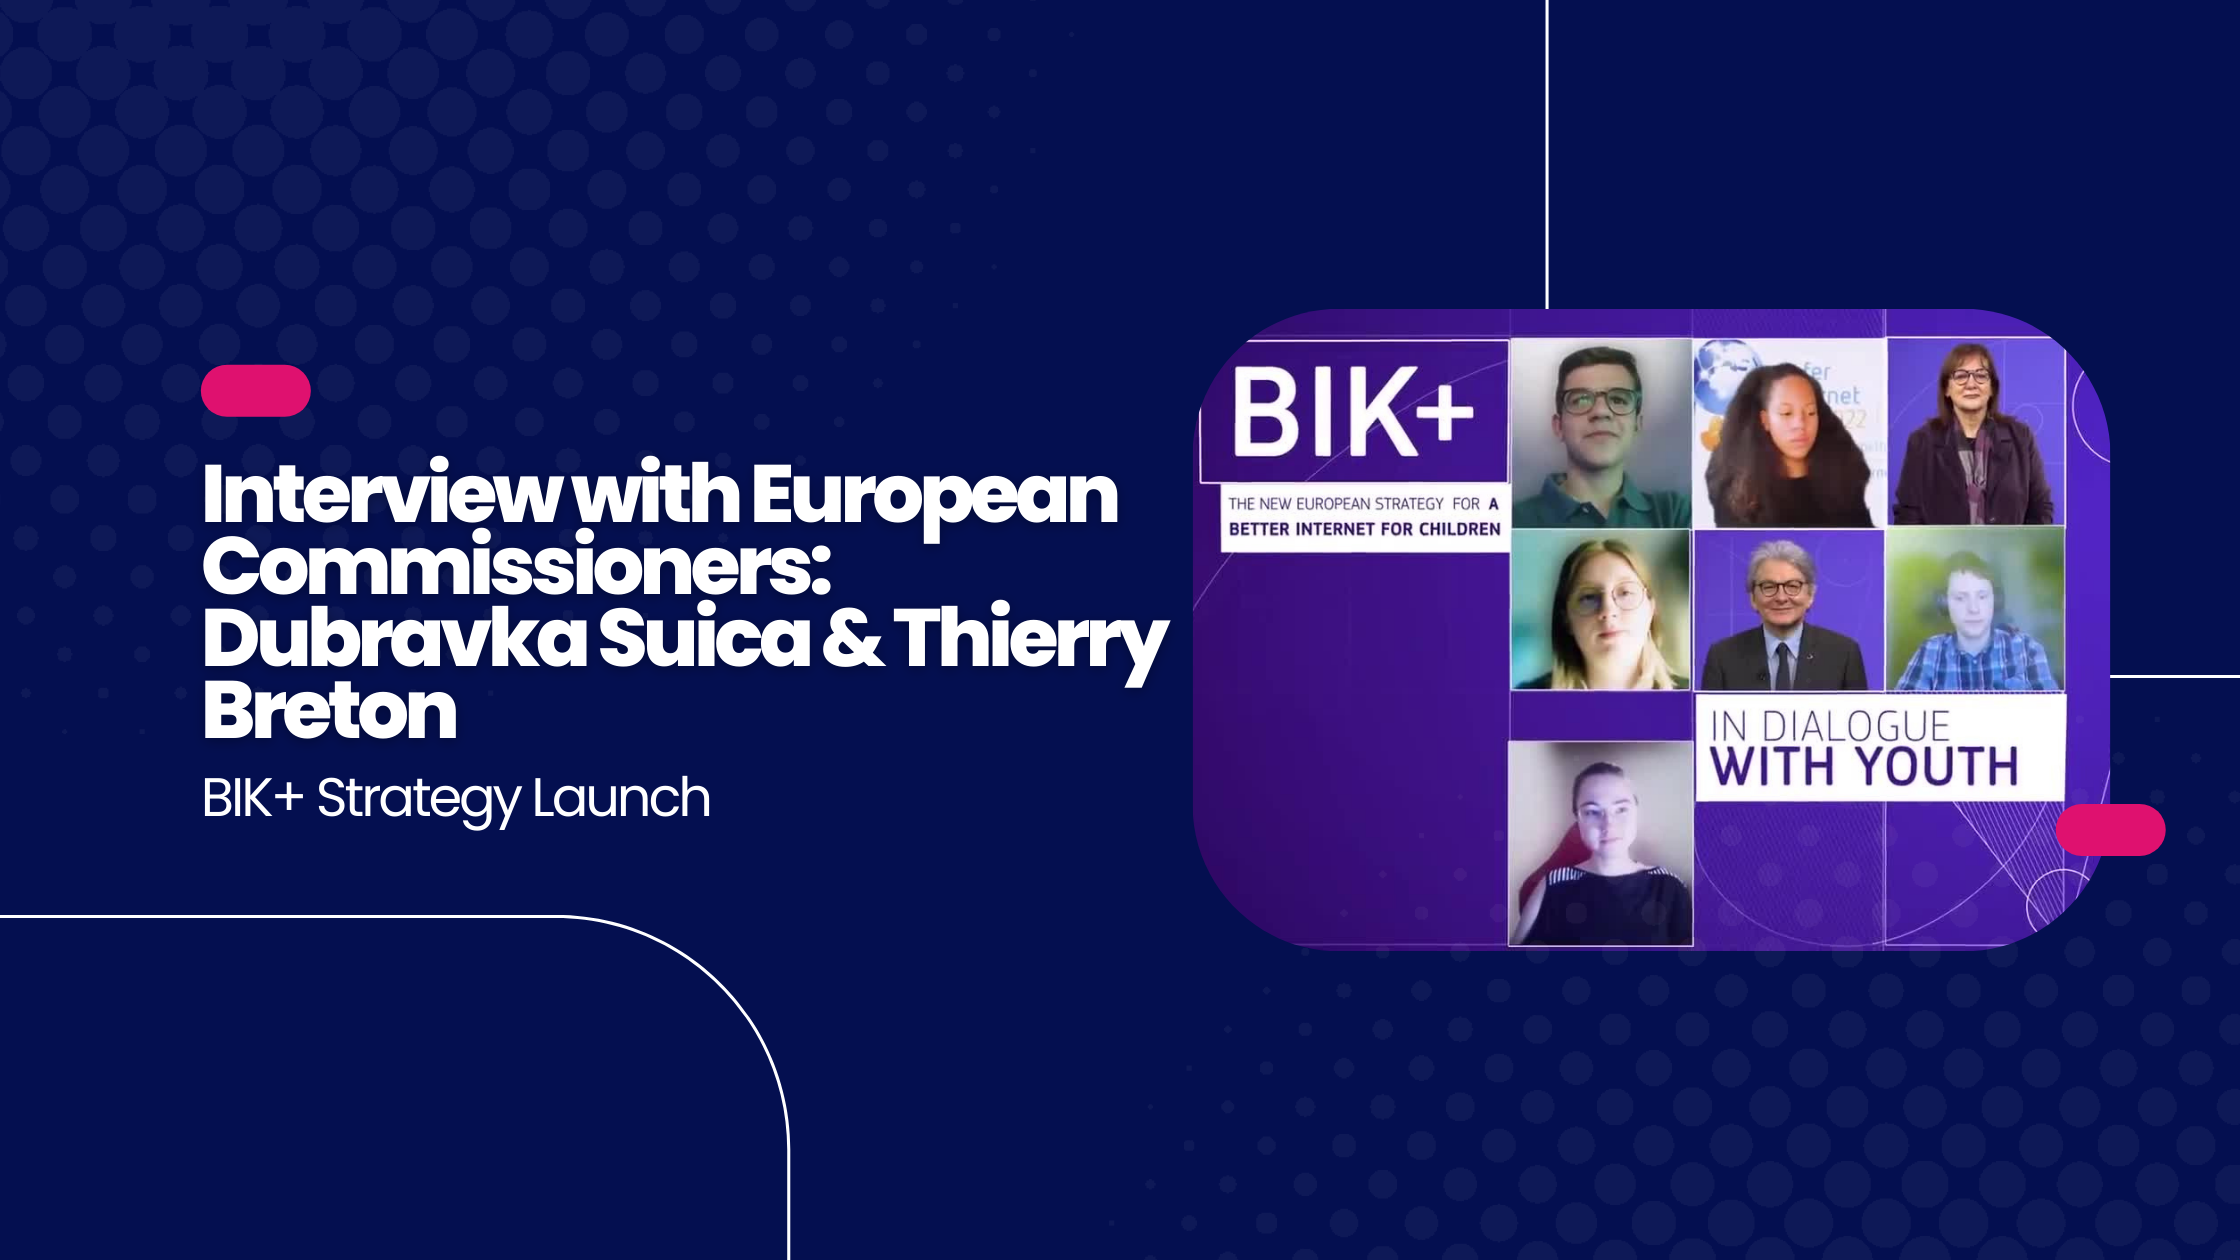 BIK+ Strategy Launch – Interview with European Commissioners: Dubravka Suica & Thierry Breton